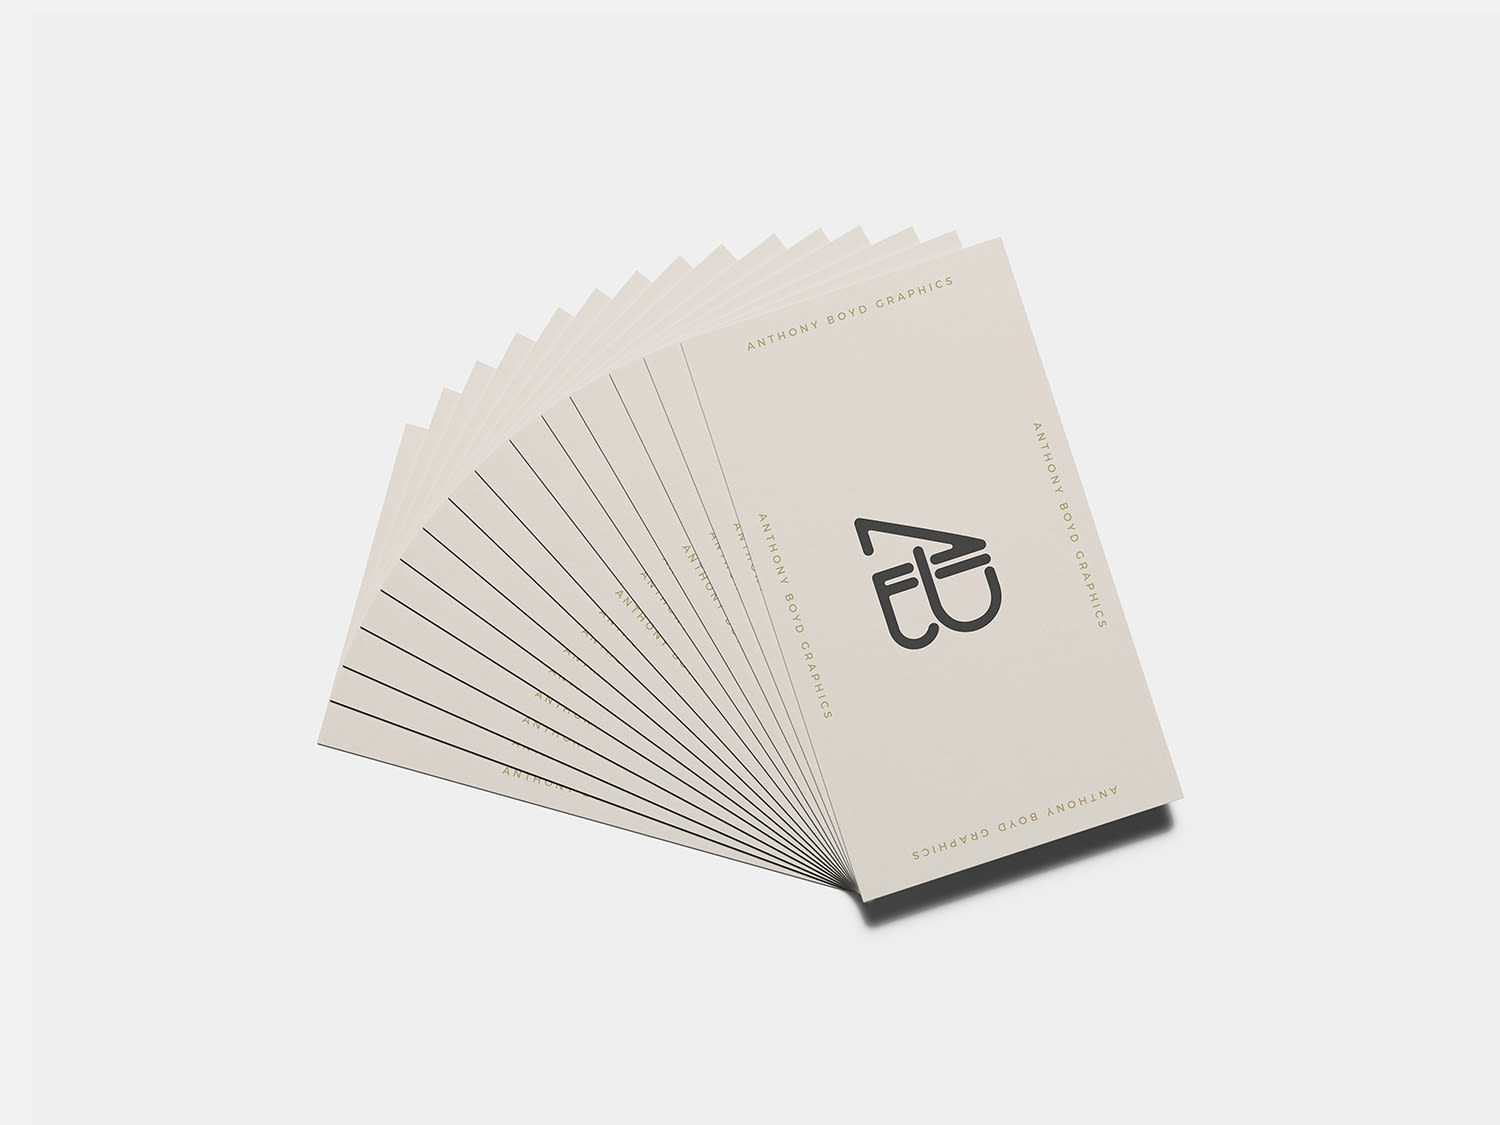 Business Card Mockup #6 by Anthony Boyd Graphics